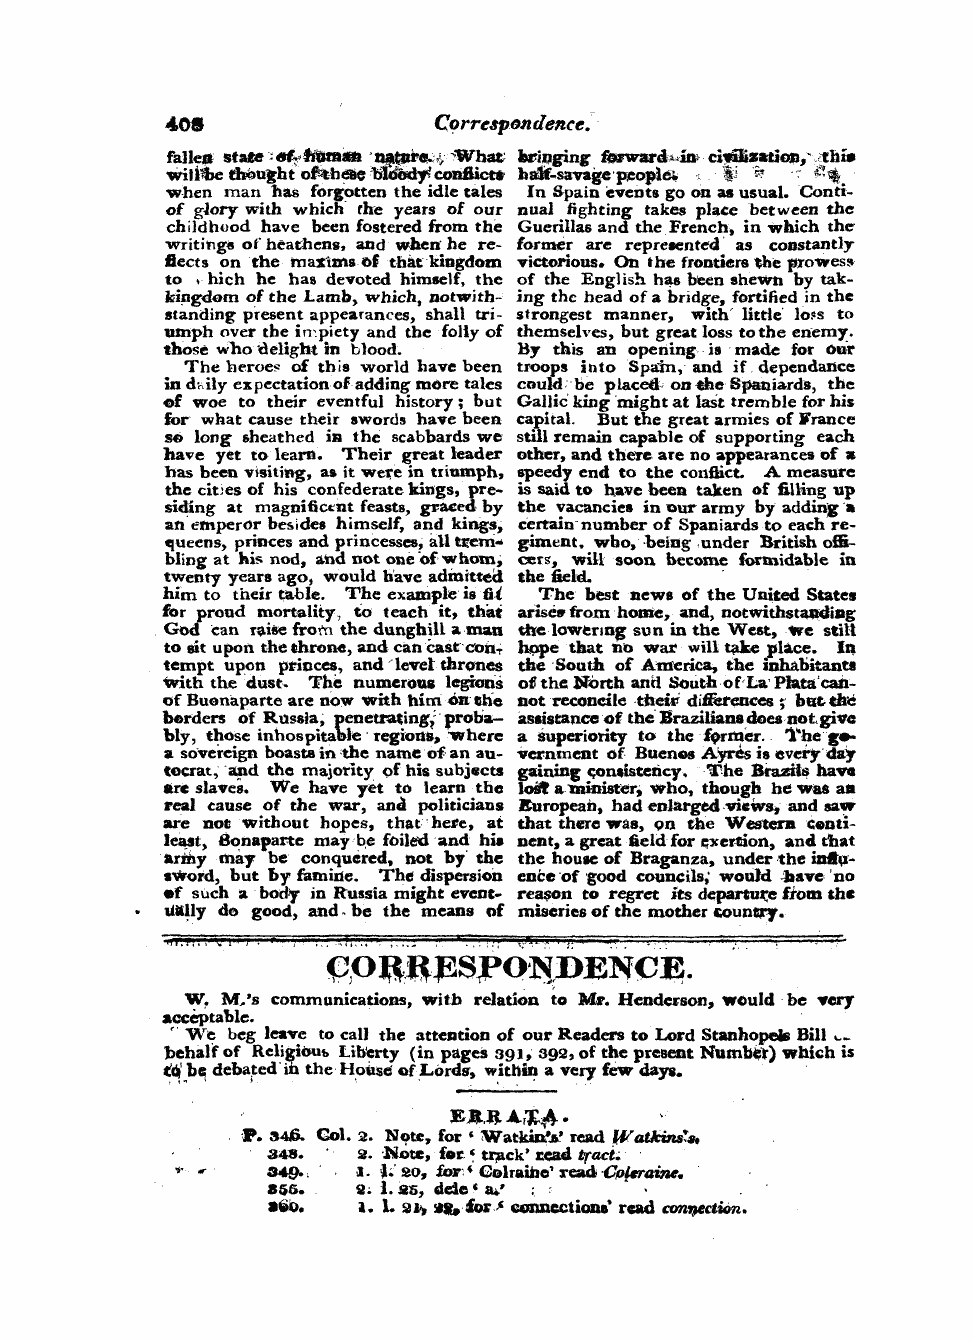 Monthly Repository (1806-1838) and Unitarian Chronicle (1832-1833): F Y, 1st edition - ' Vpmrvspqwjmwvm.